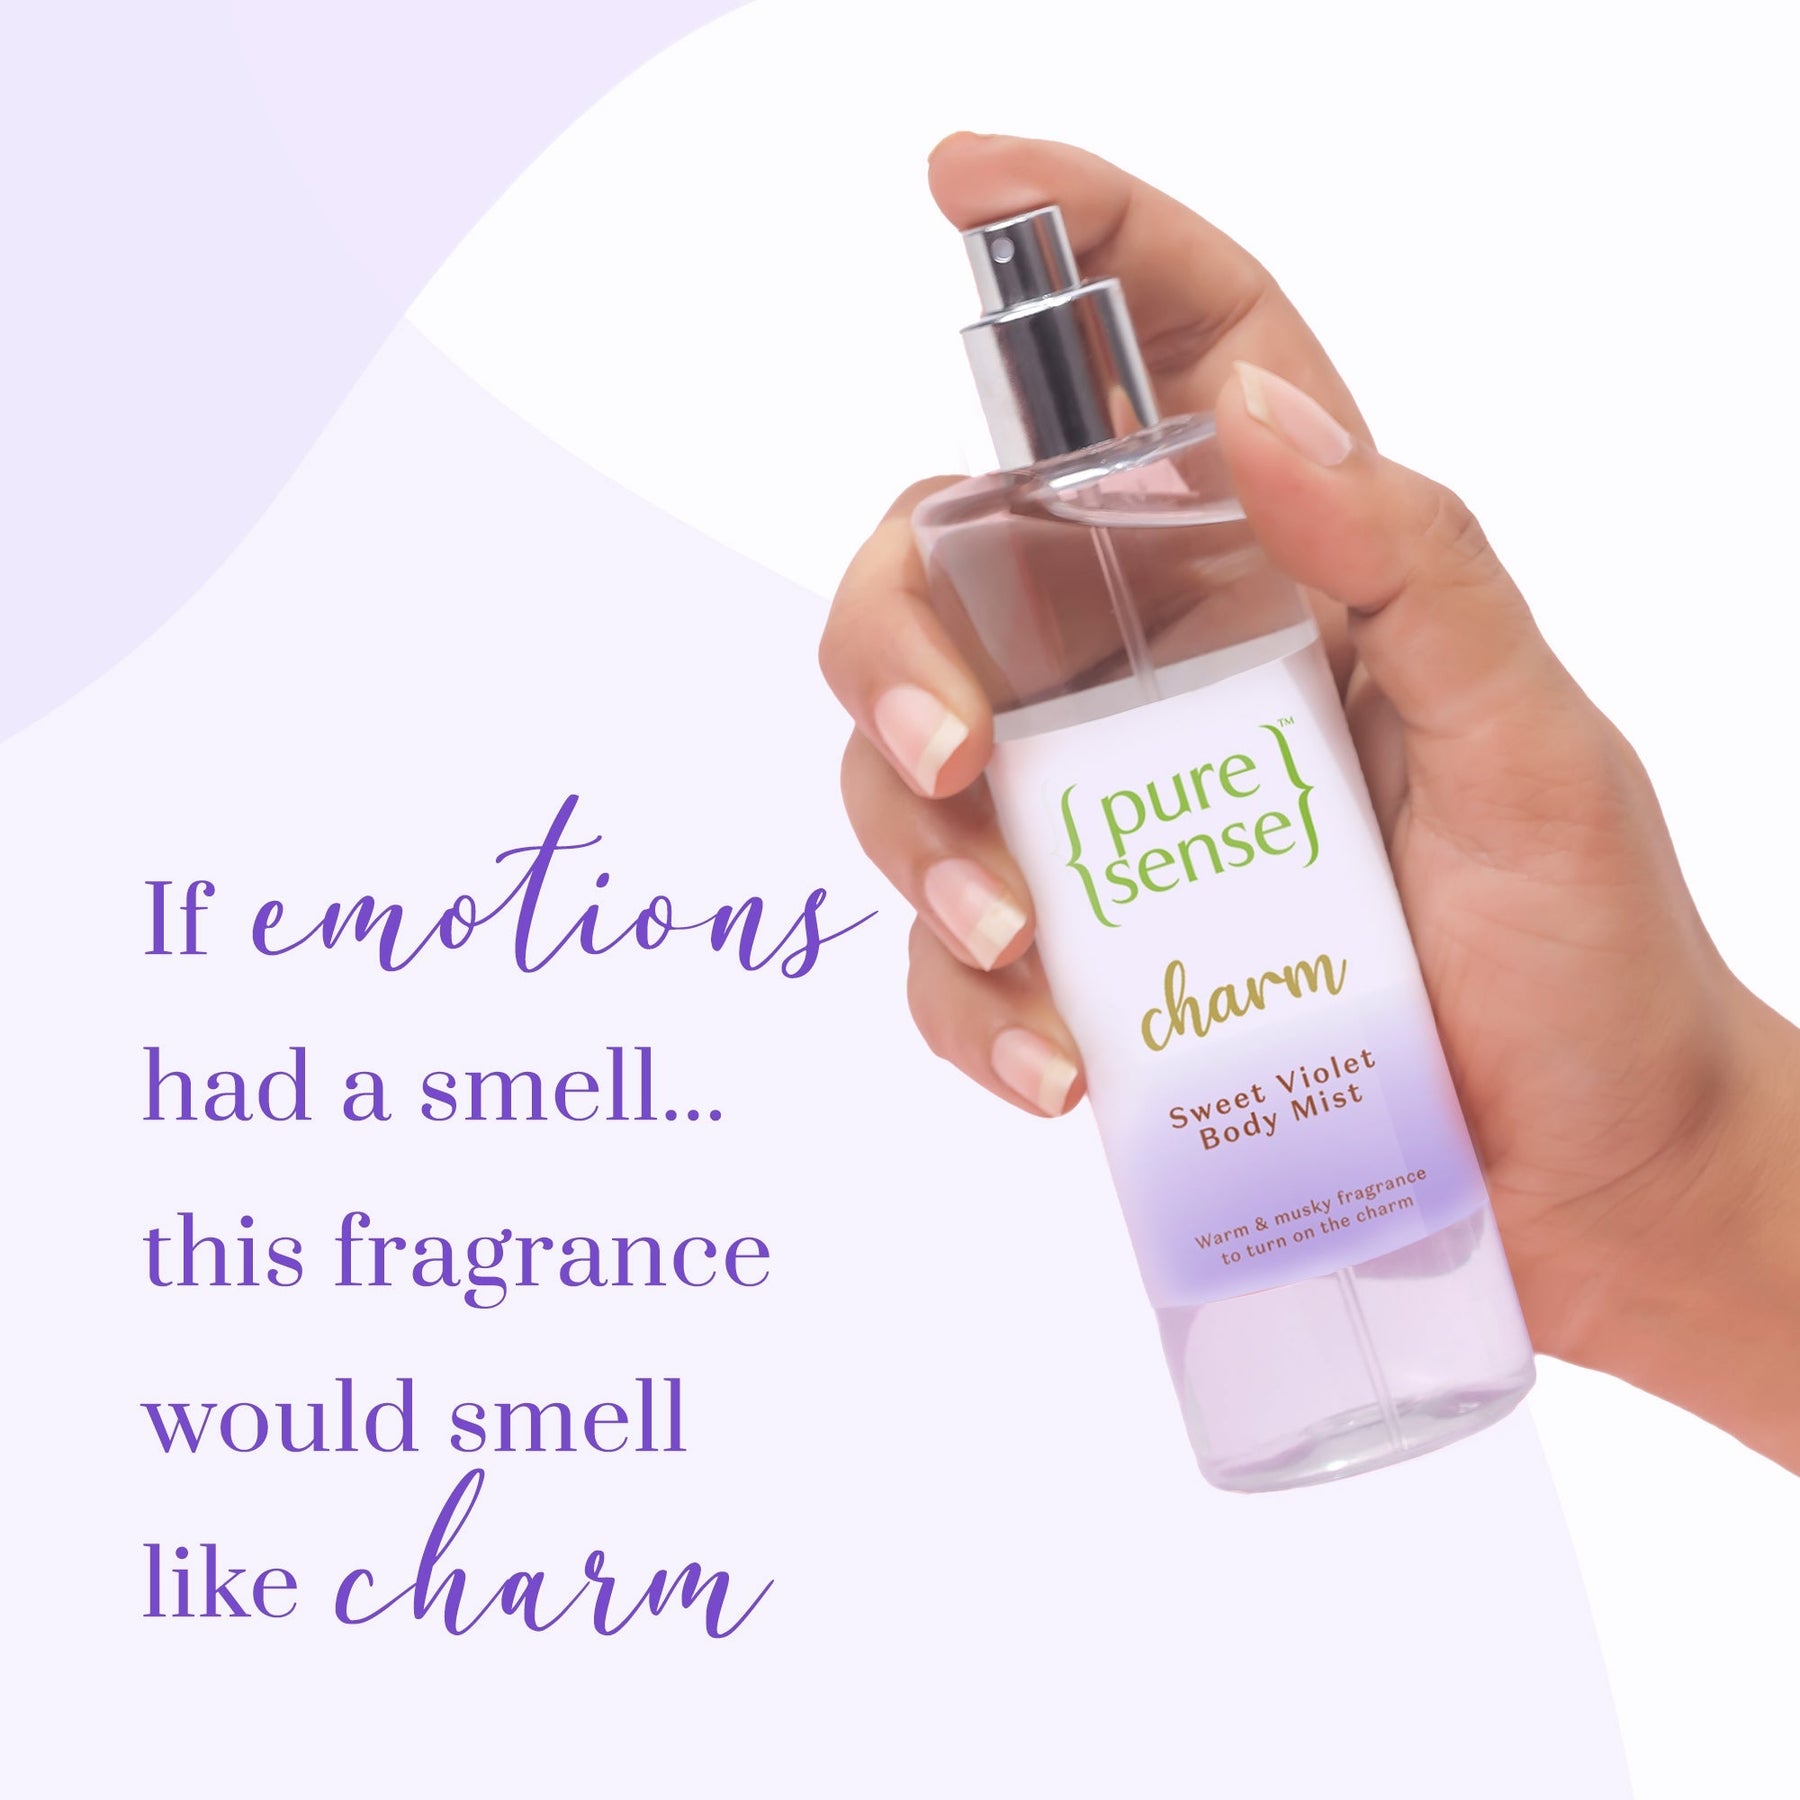 Charm Sweet Violet Body Mist (Pack of 2) | From the makers of Parachute Advansed | 300ml